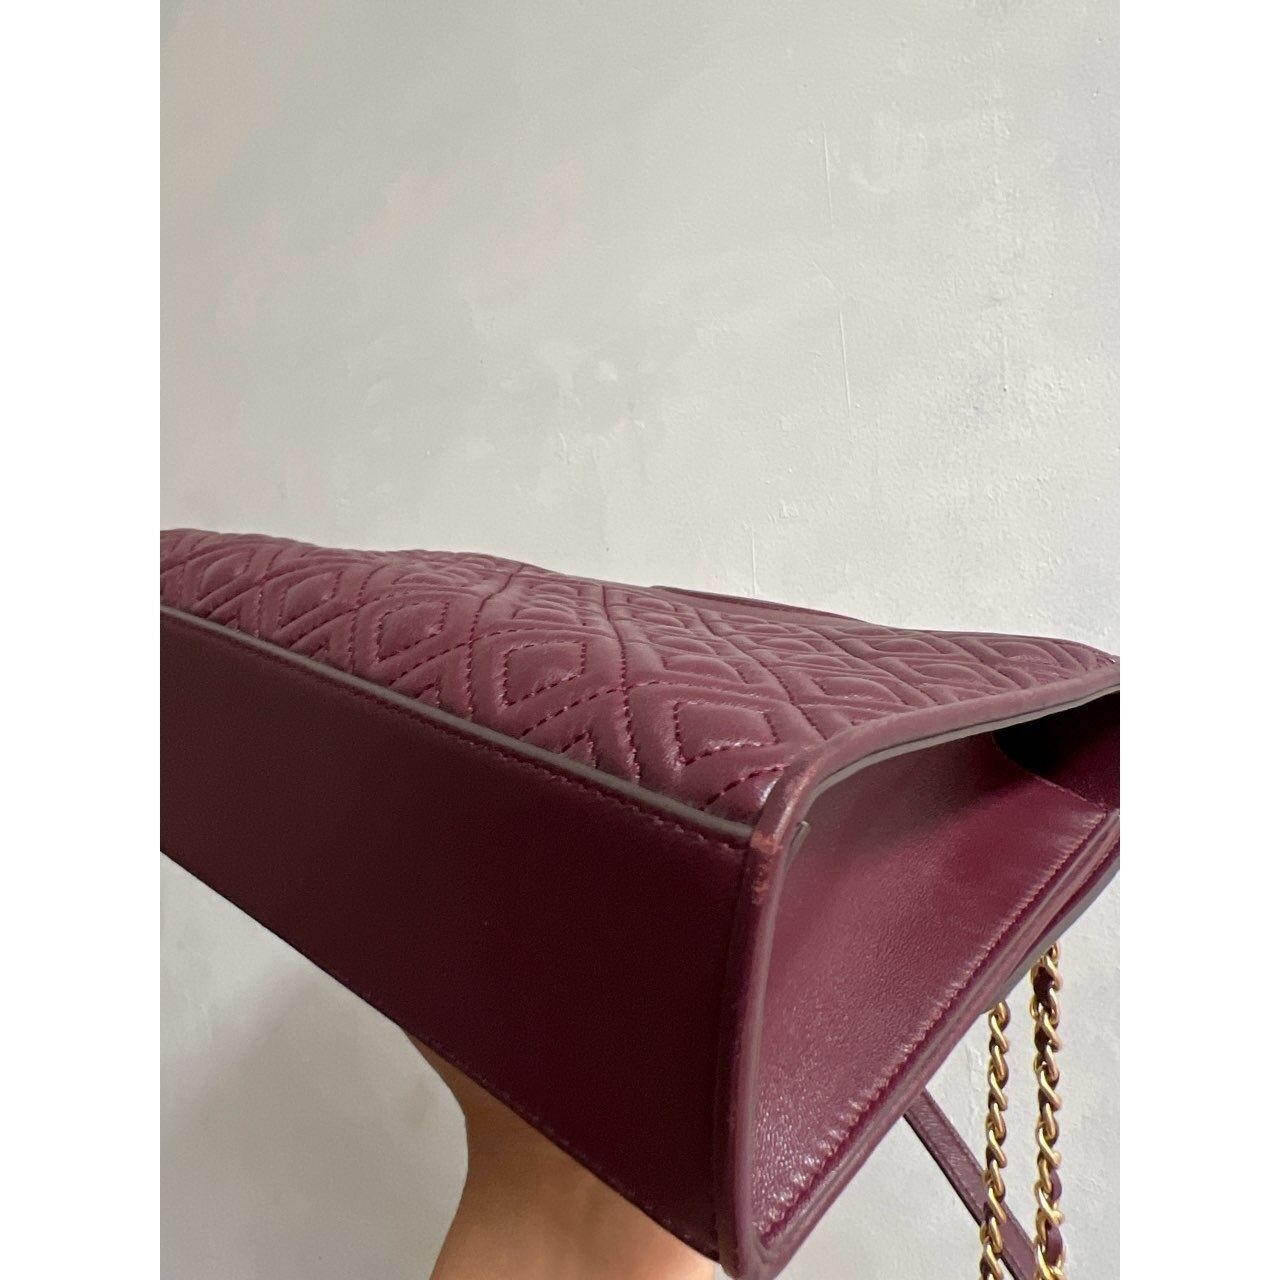 Tory Burch Fleming Convertible Claret Leather GHW Shoulder Bag